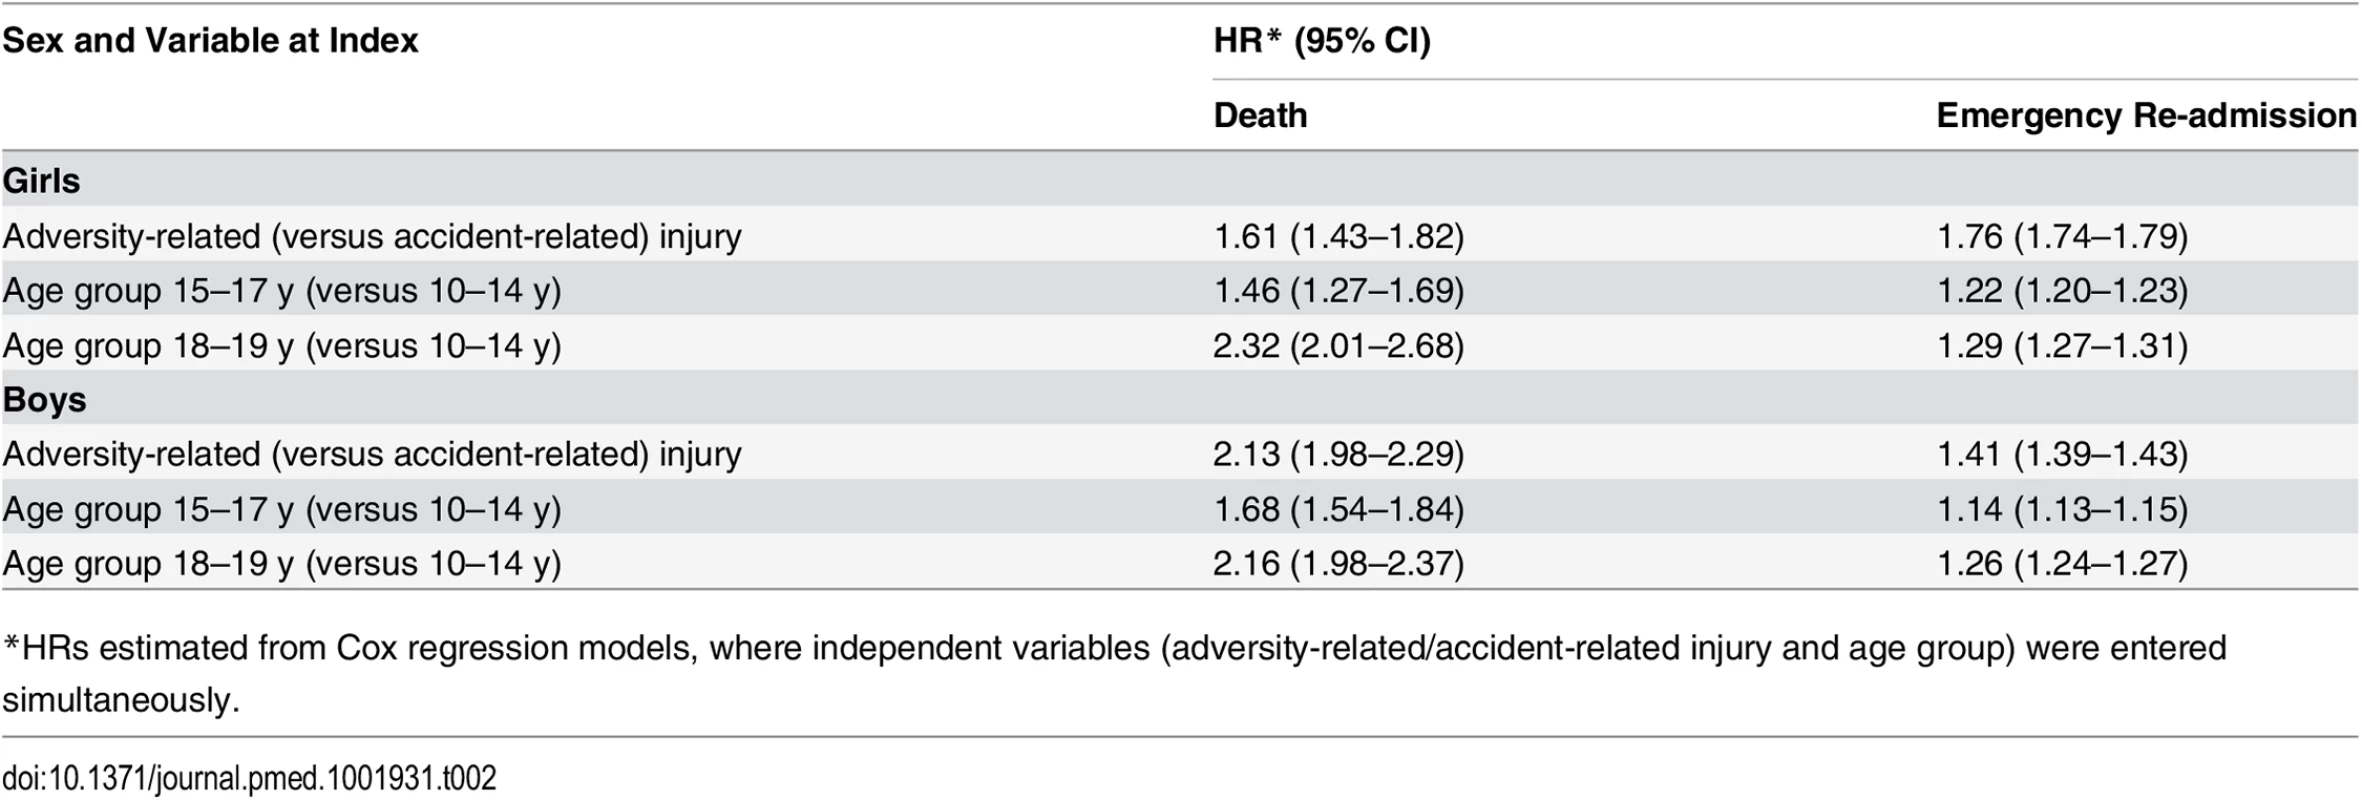 Relative risks of death and emergency re-admission within 10 y of index admission.